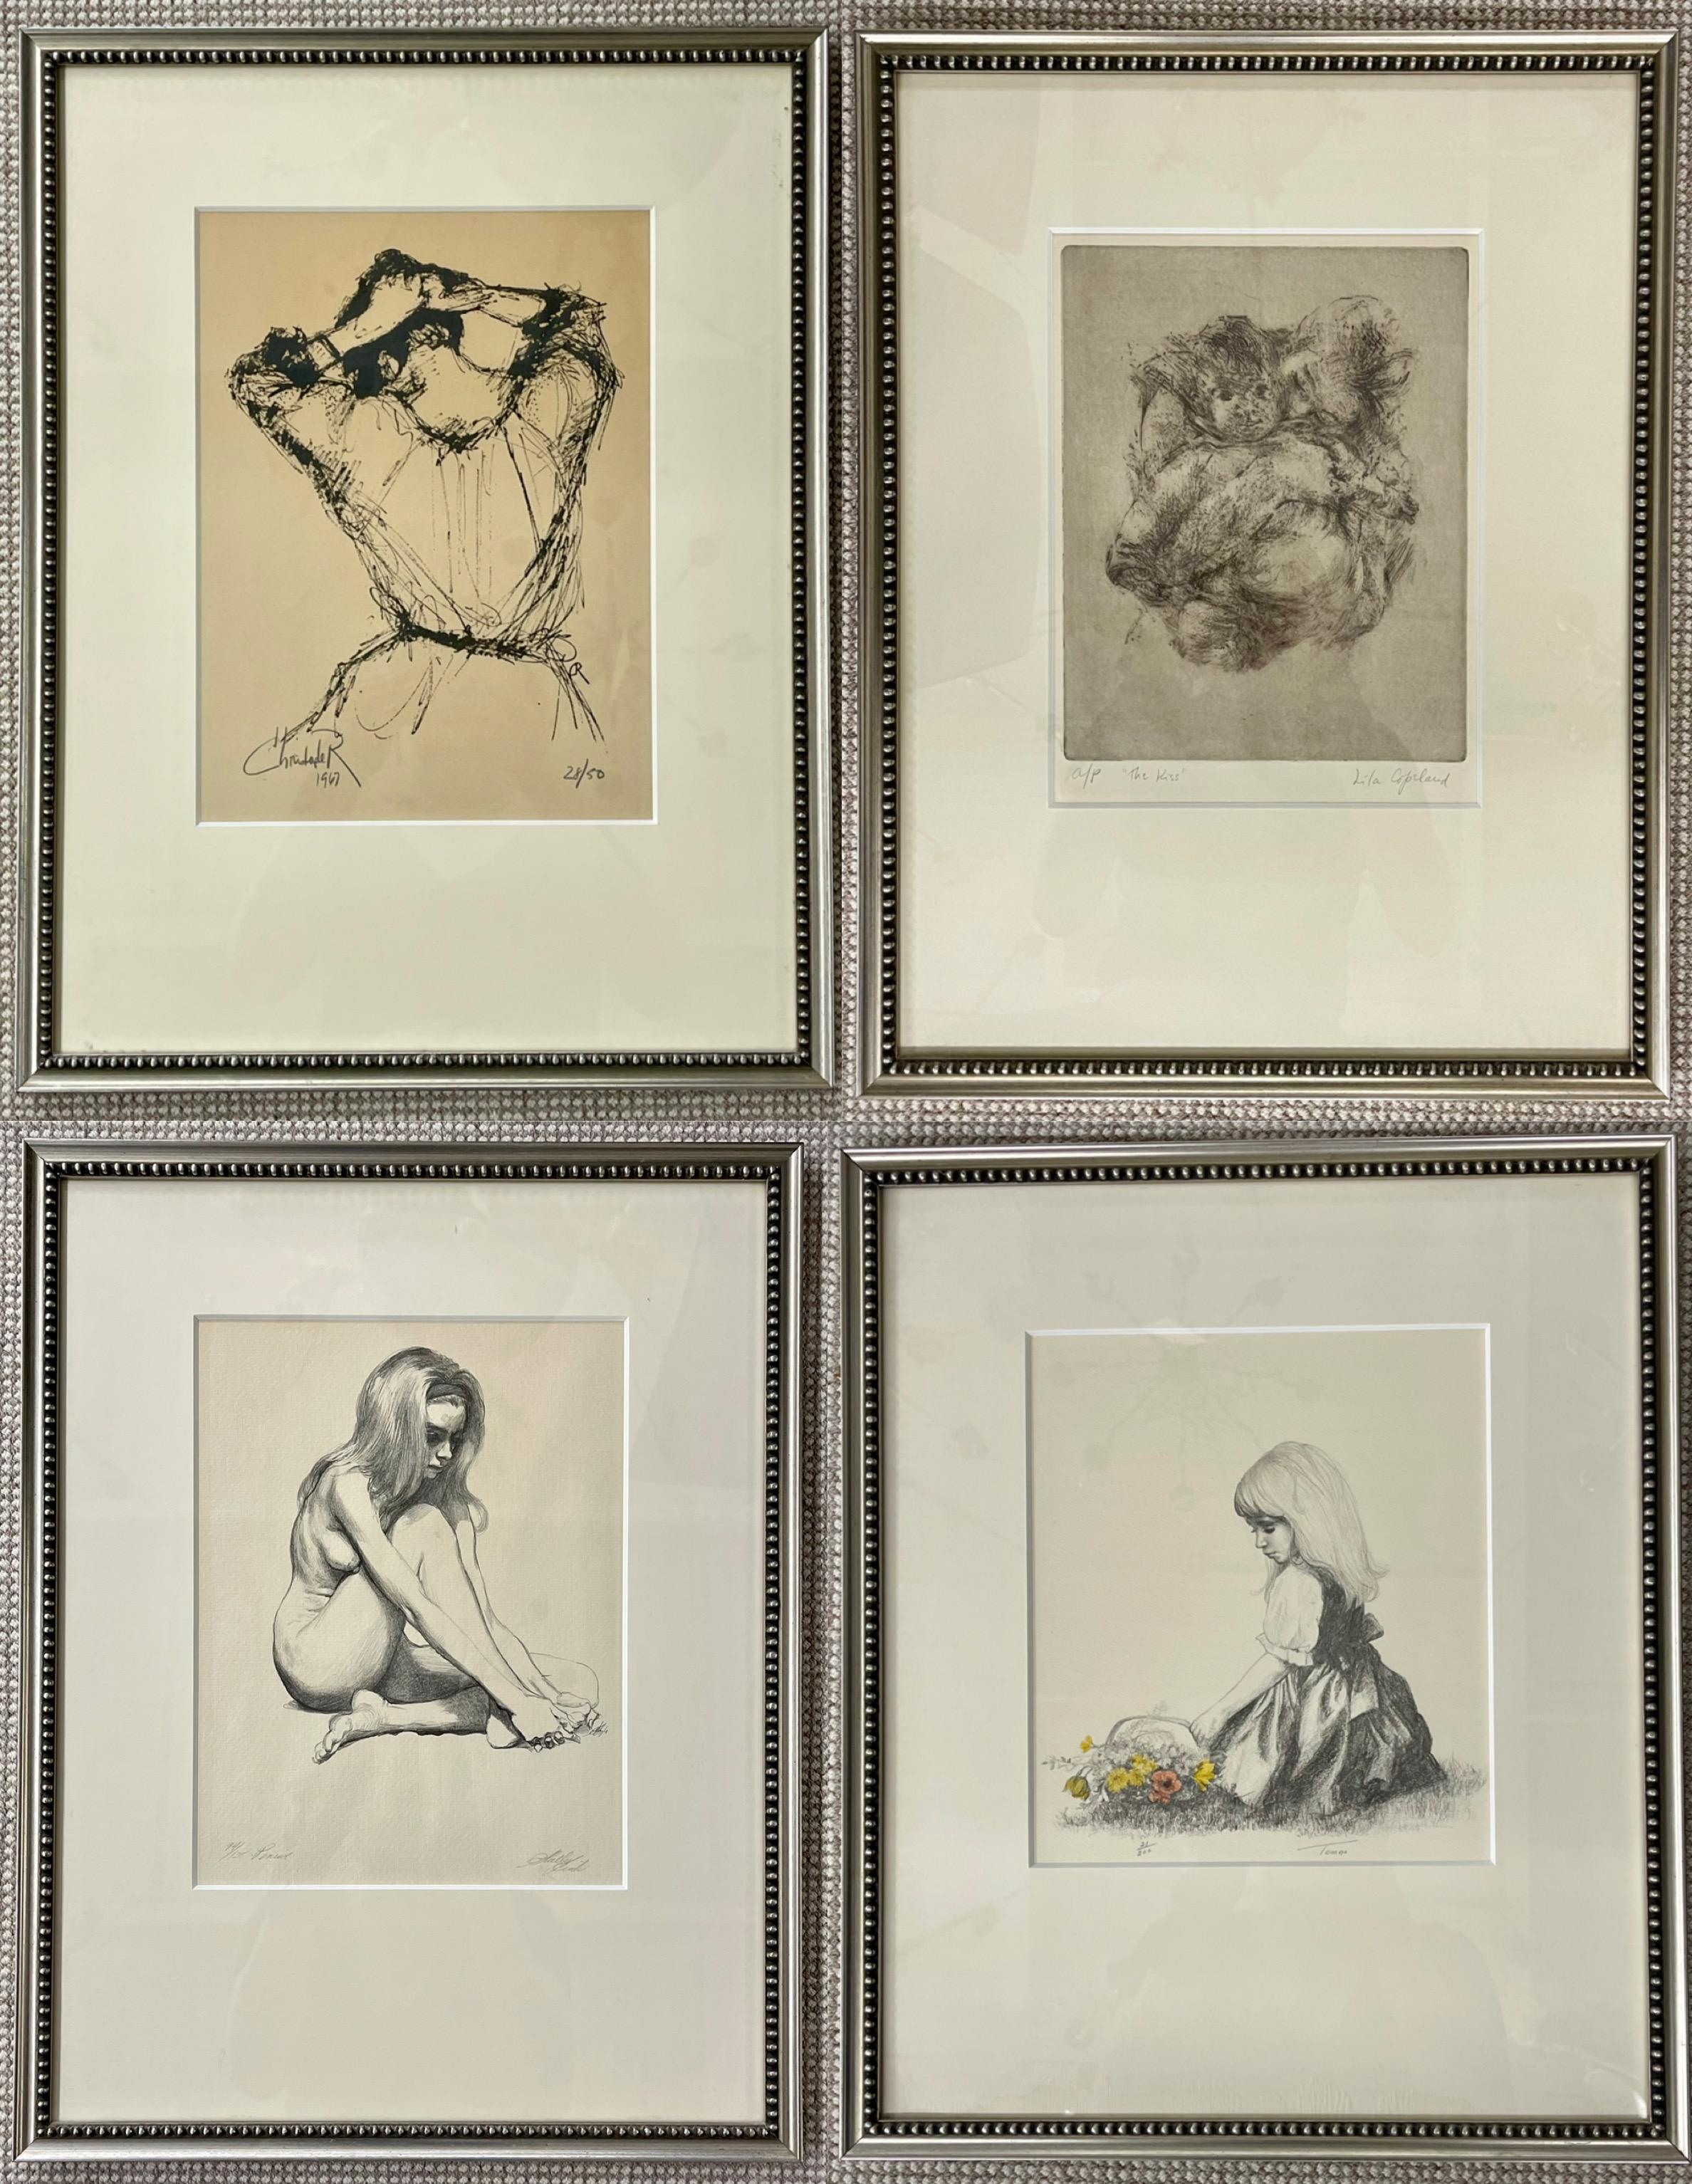 Four framed pencil Signed and Numbered Etchings. Finely framed and matted. A simply lovely group of wall decorations. Each hand drawn, signed and numbered in custom finely framed and matted mountings. 15 by 20 inches framed.